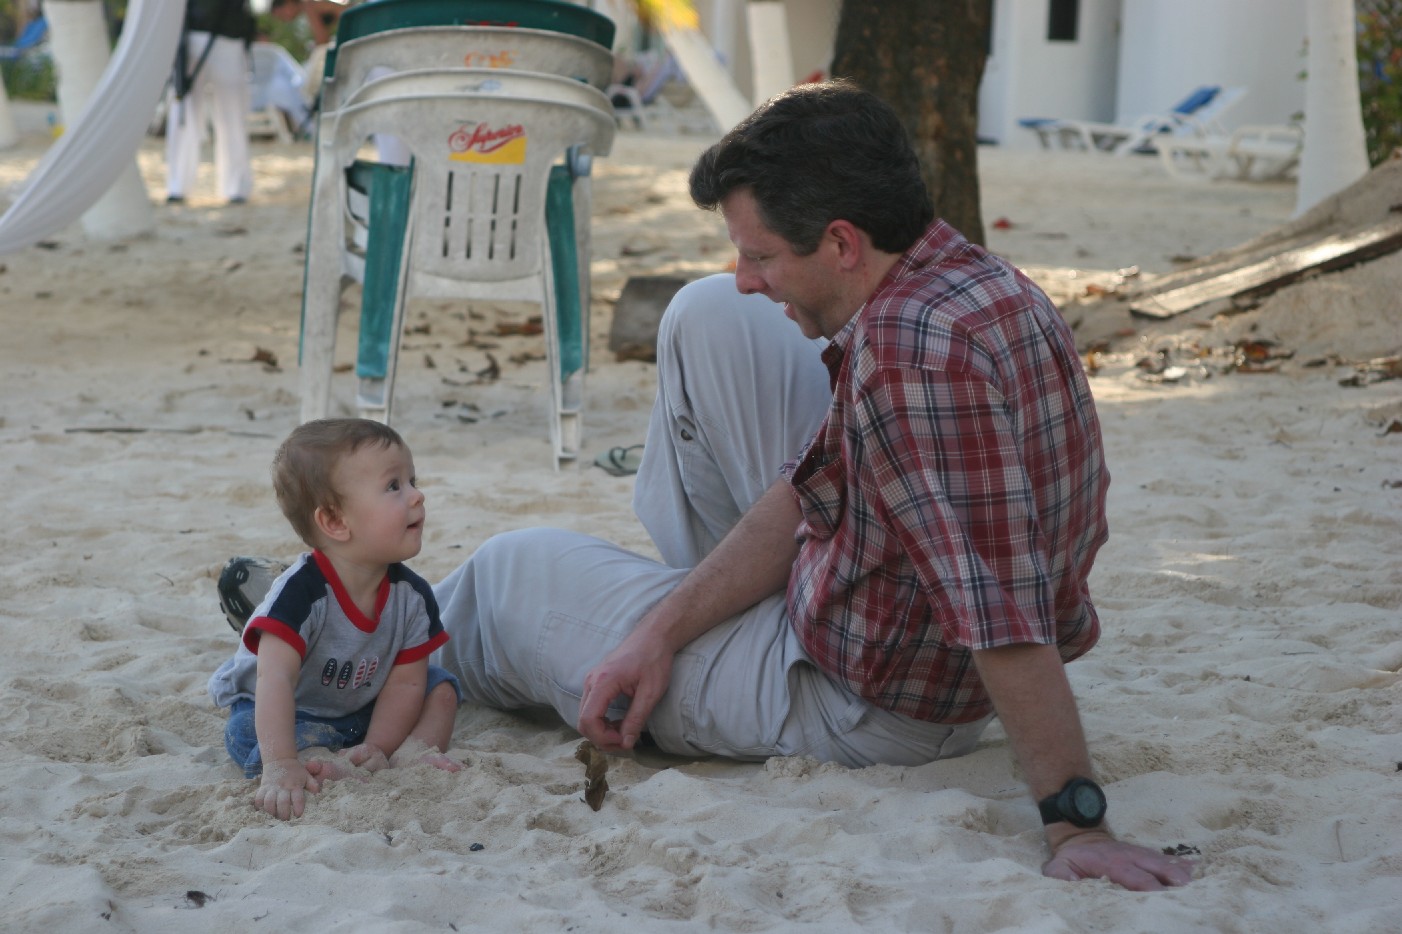 me and daddy in the sand